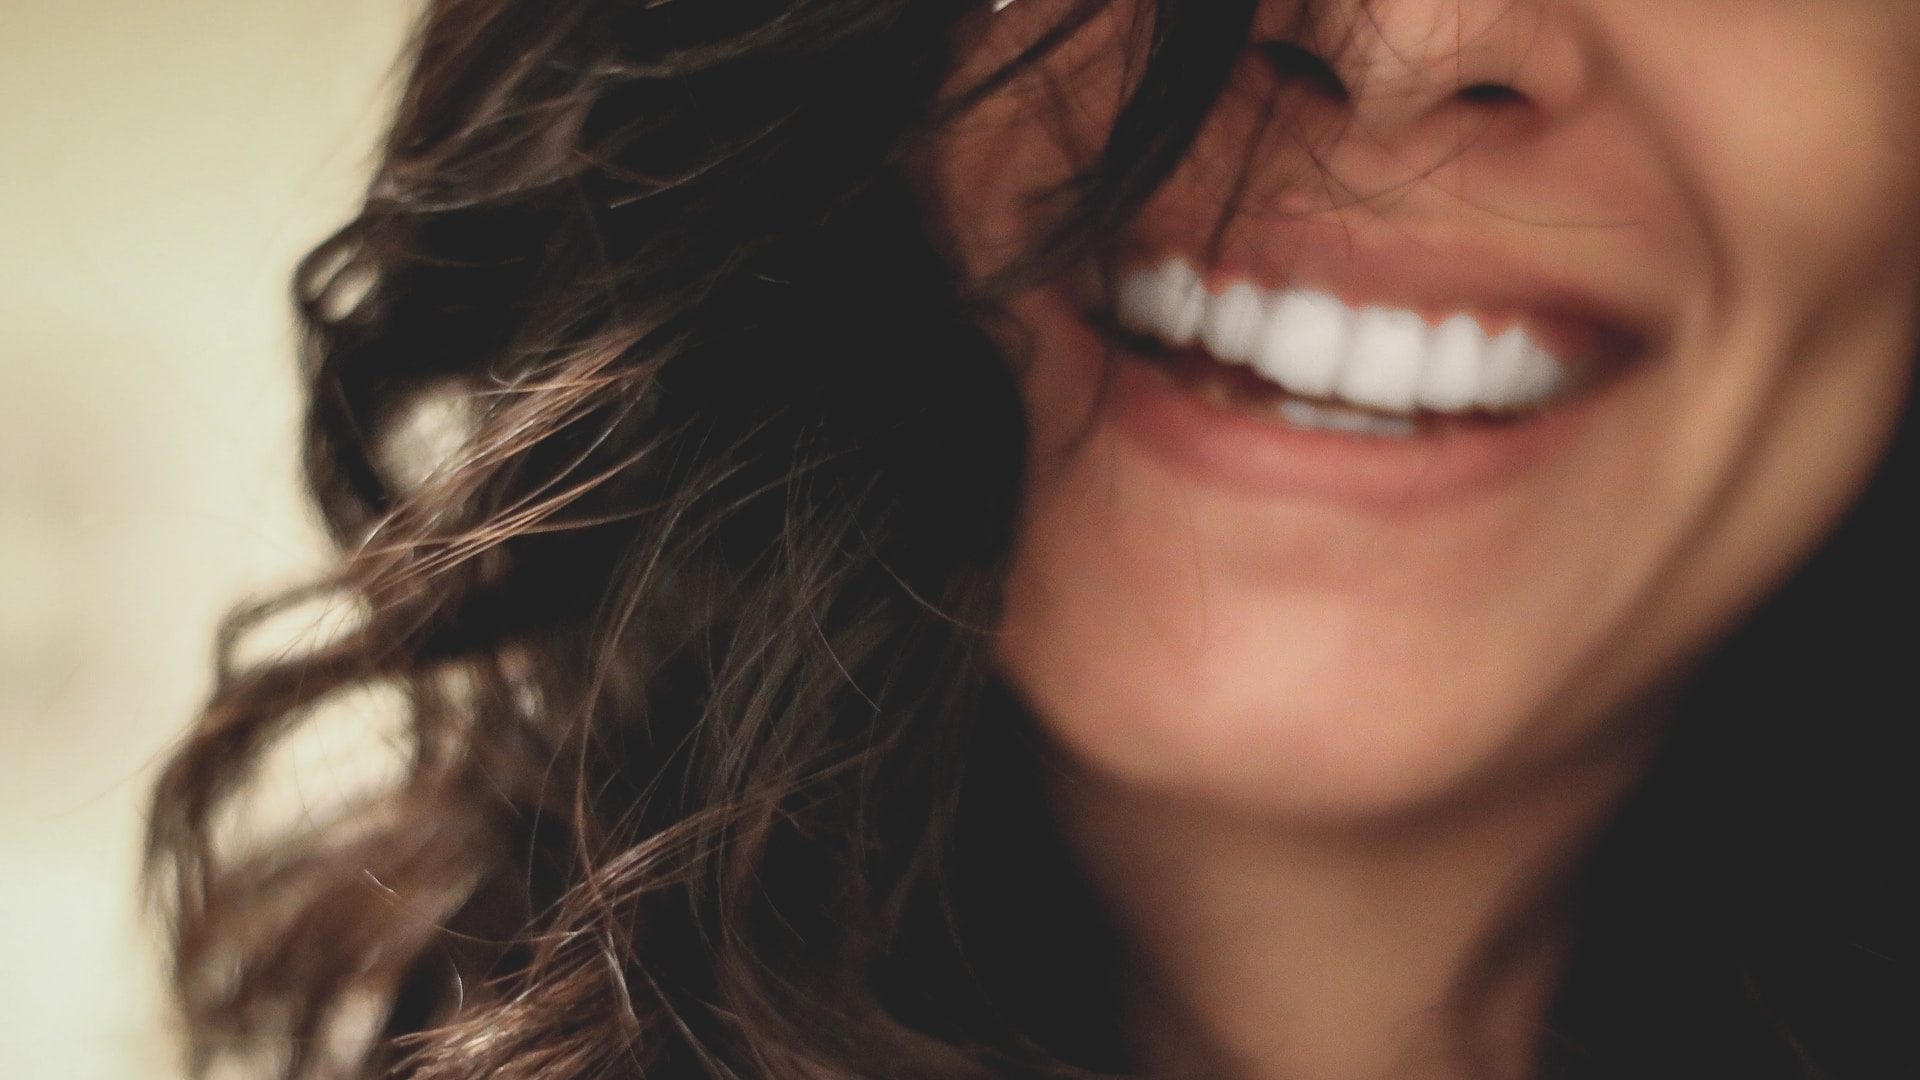 long black haired woman smiling close-up photography